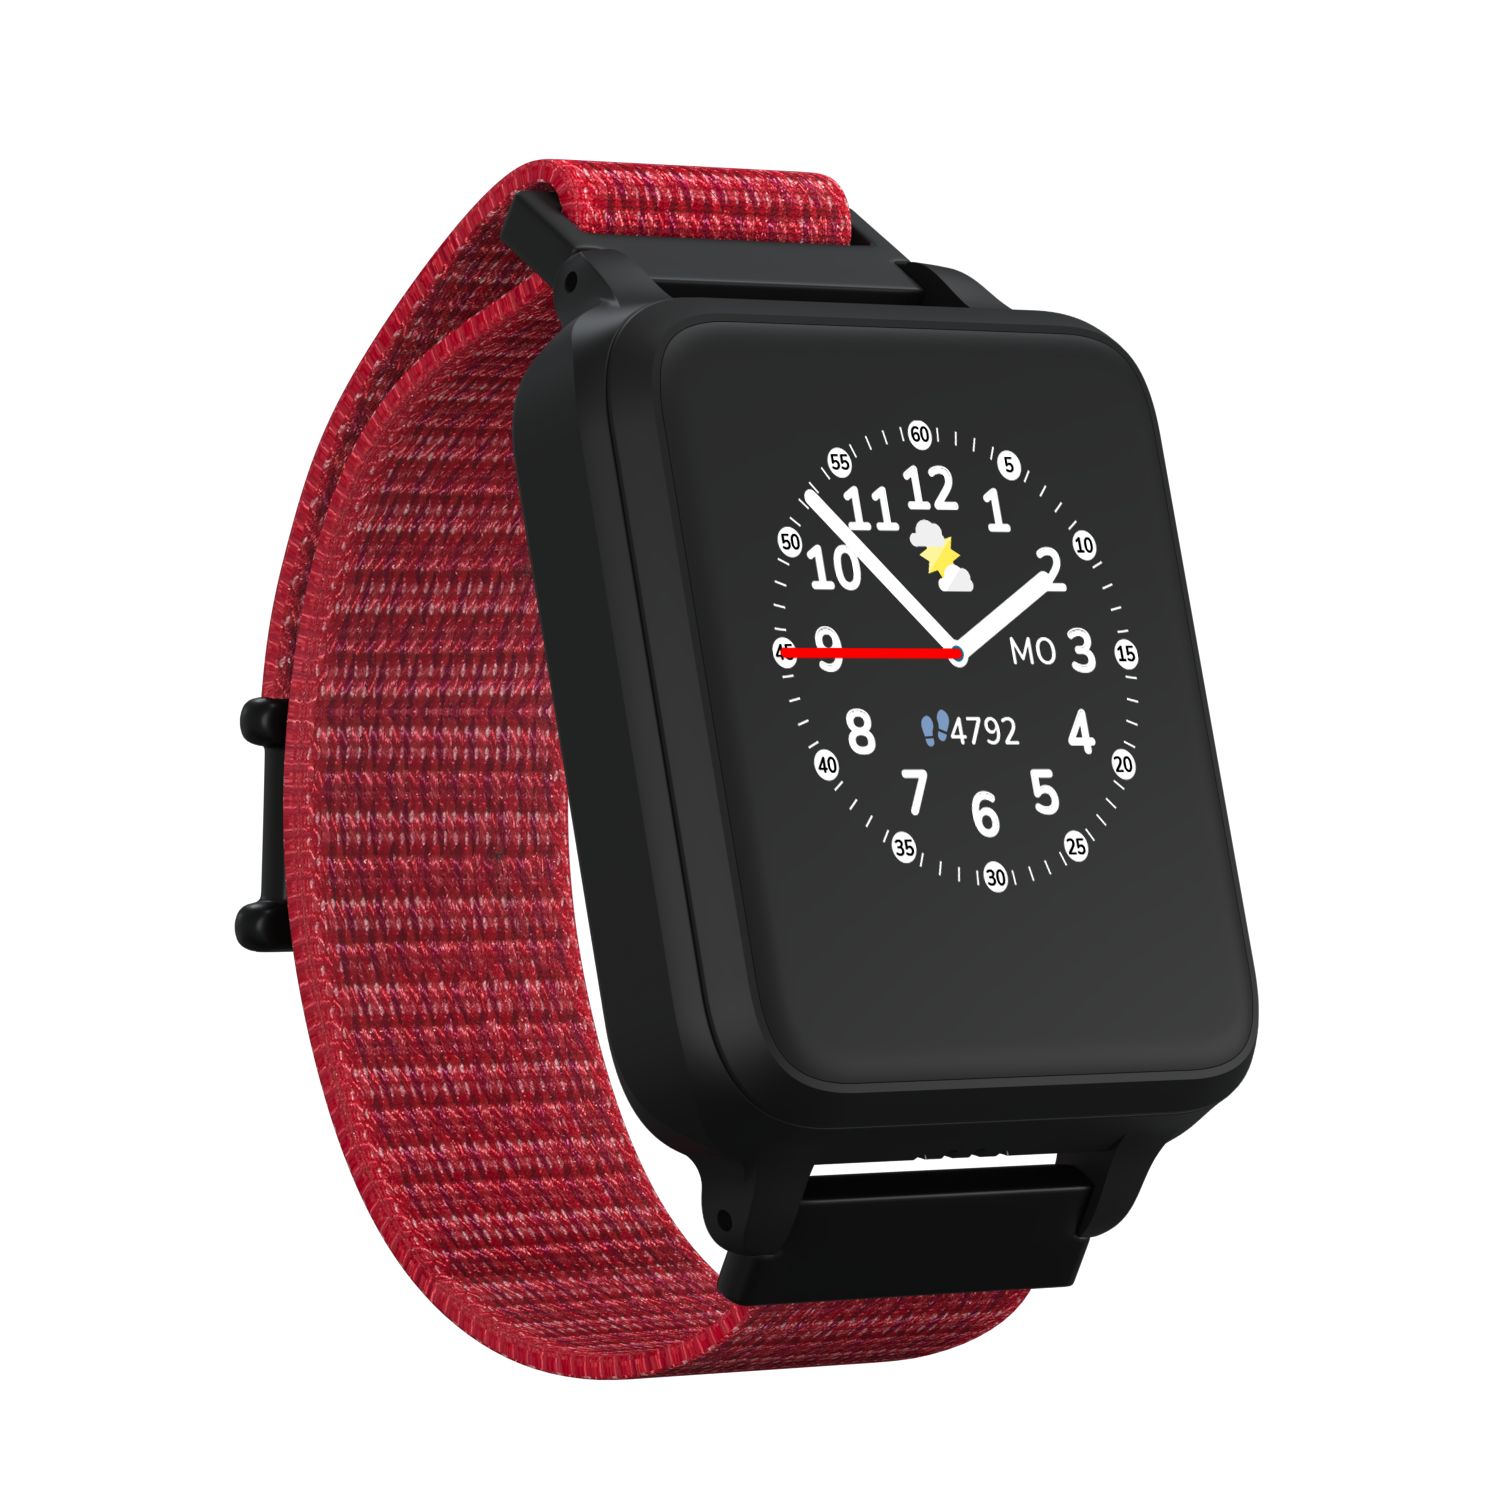 ANIO 5s Kinder Smartwatch Uhr Rot GPS Ortung 6+ Jahre Android LCD Display